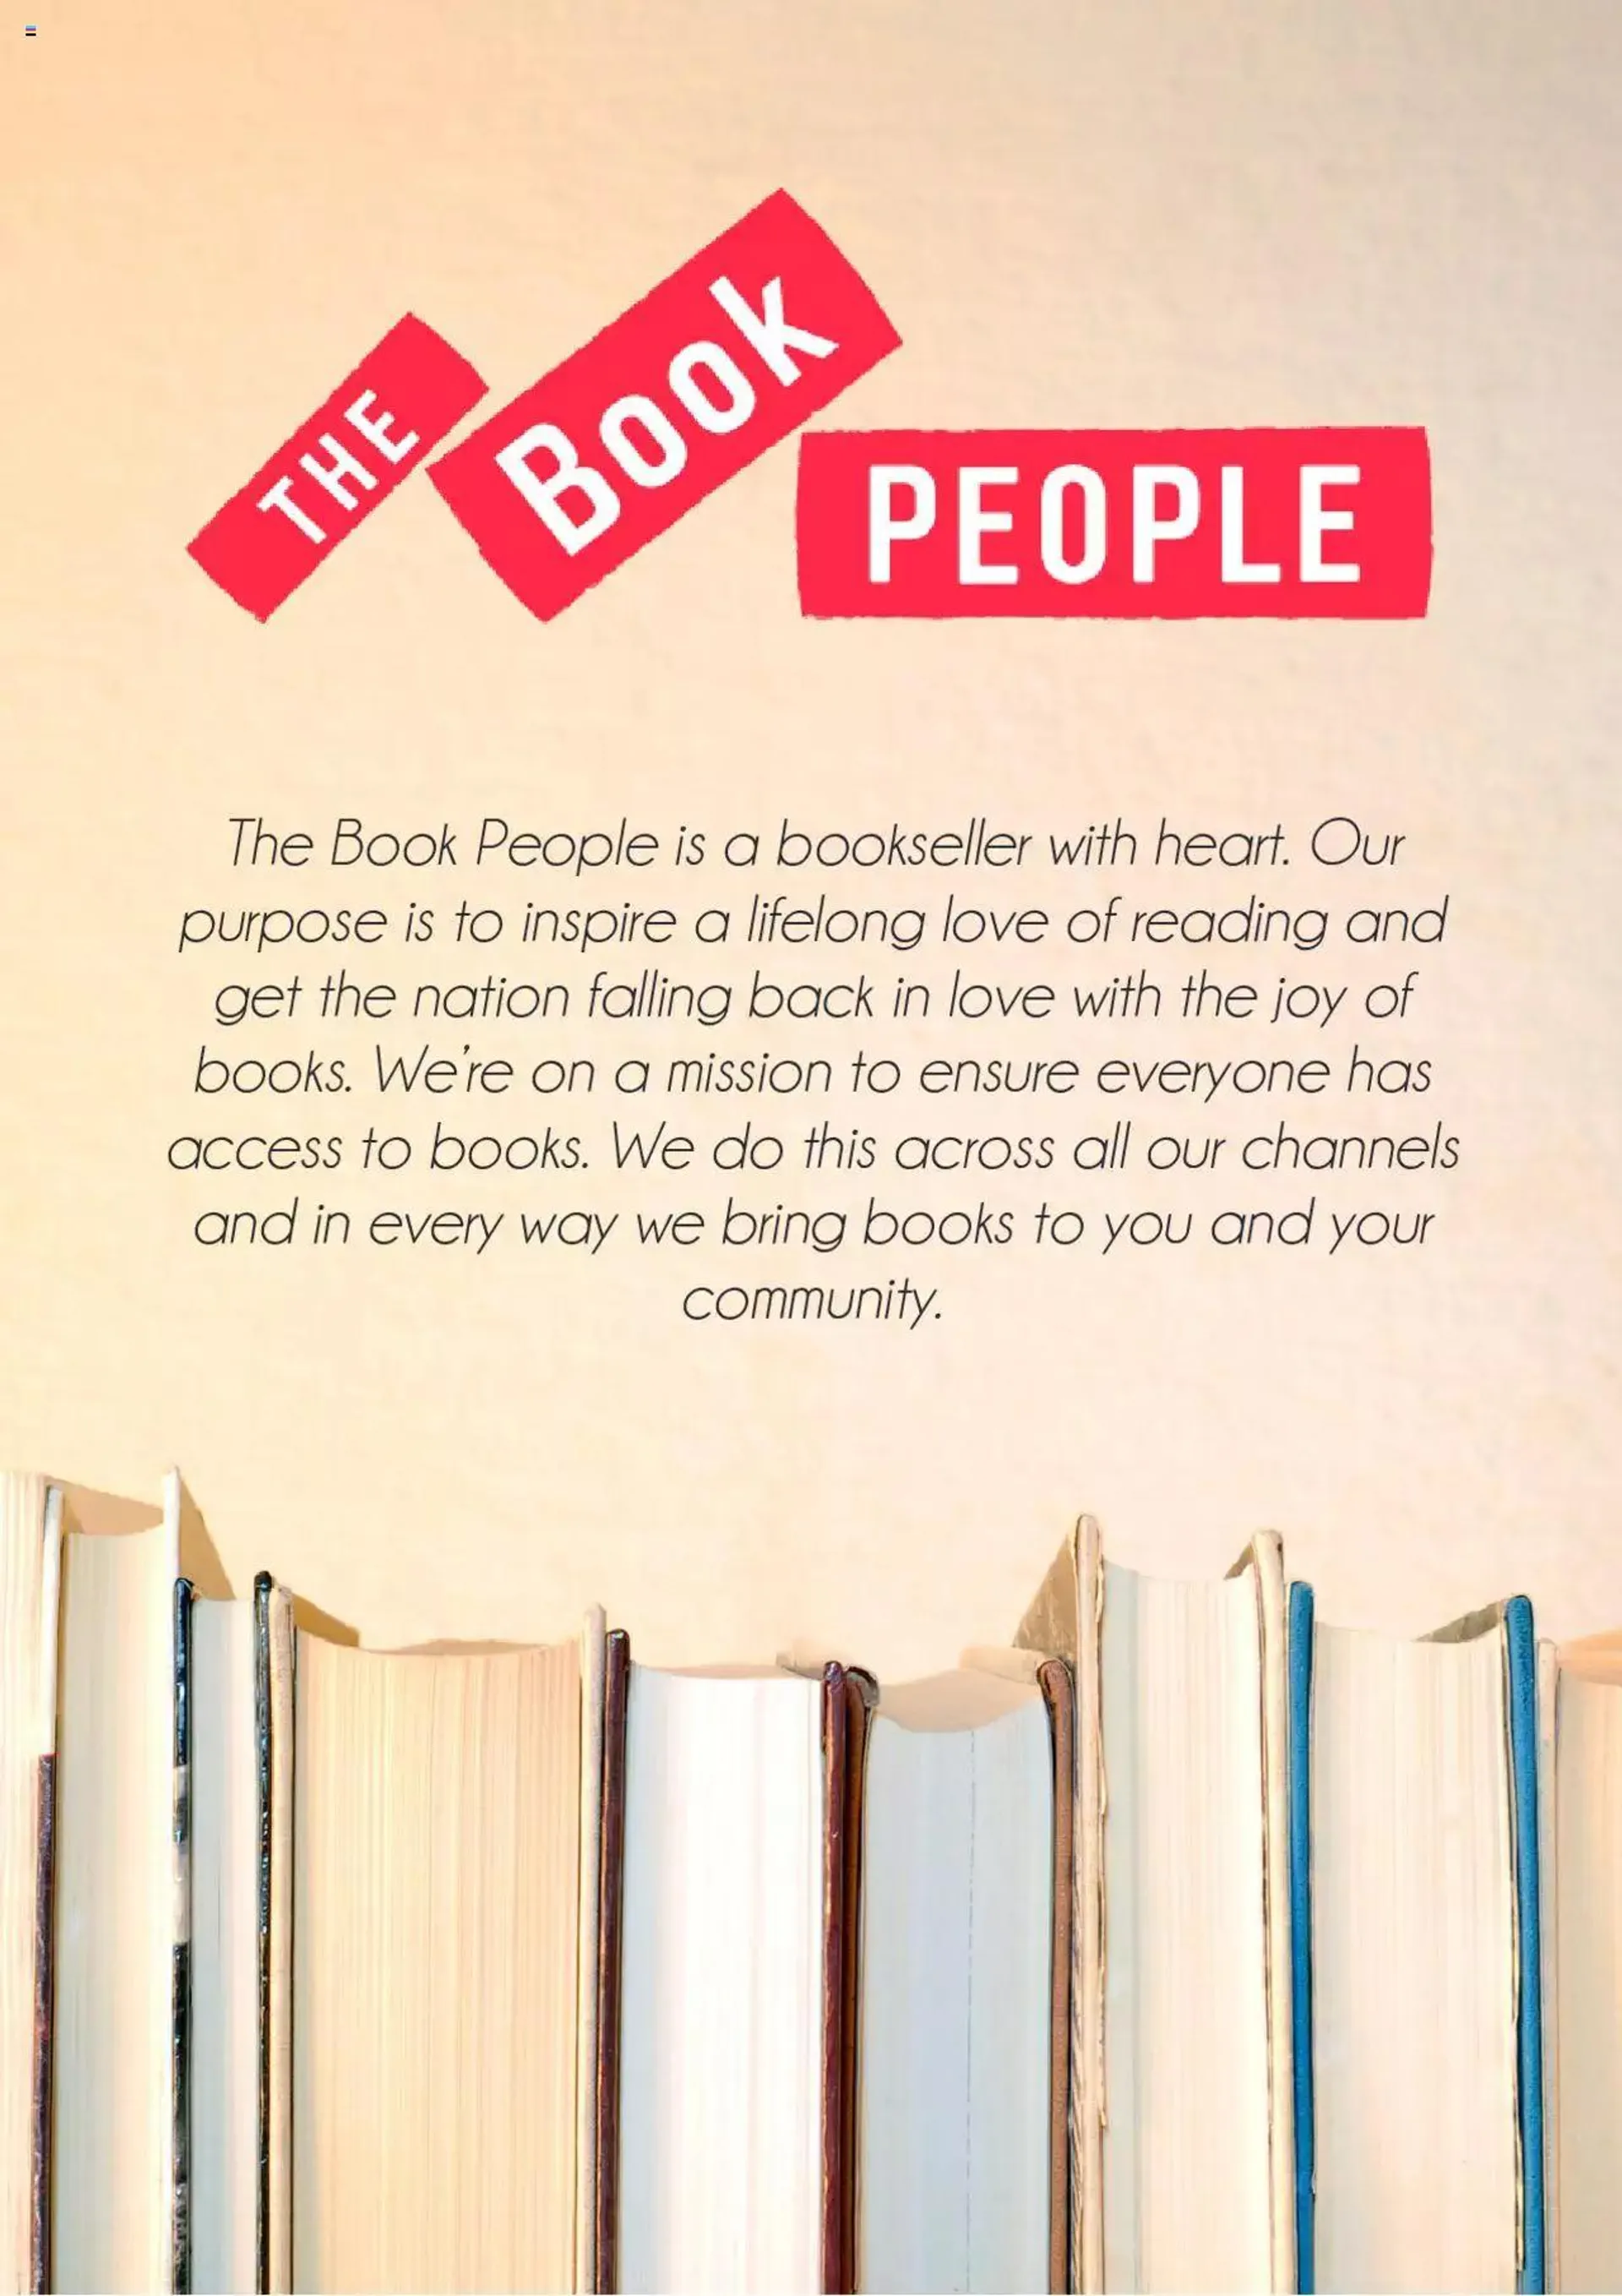 The Book People offers